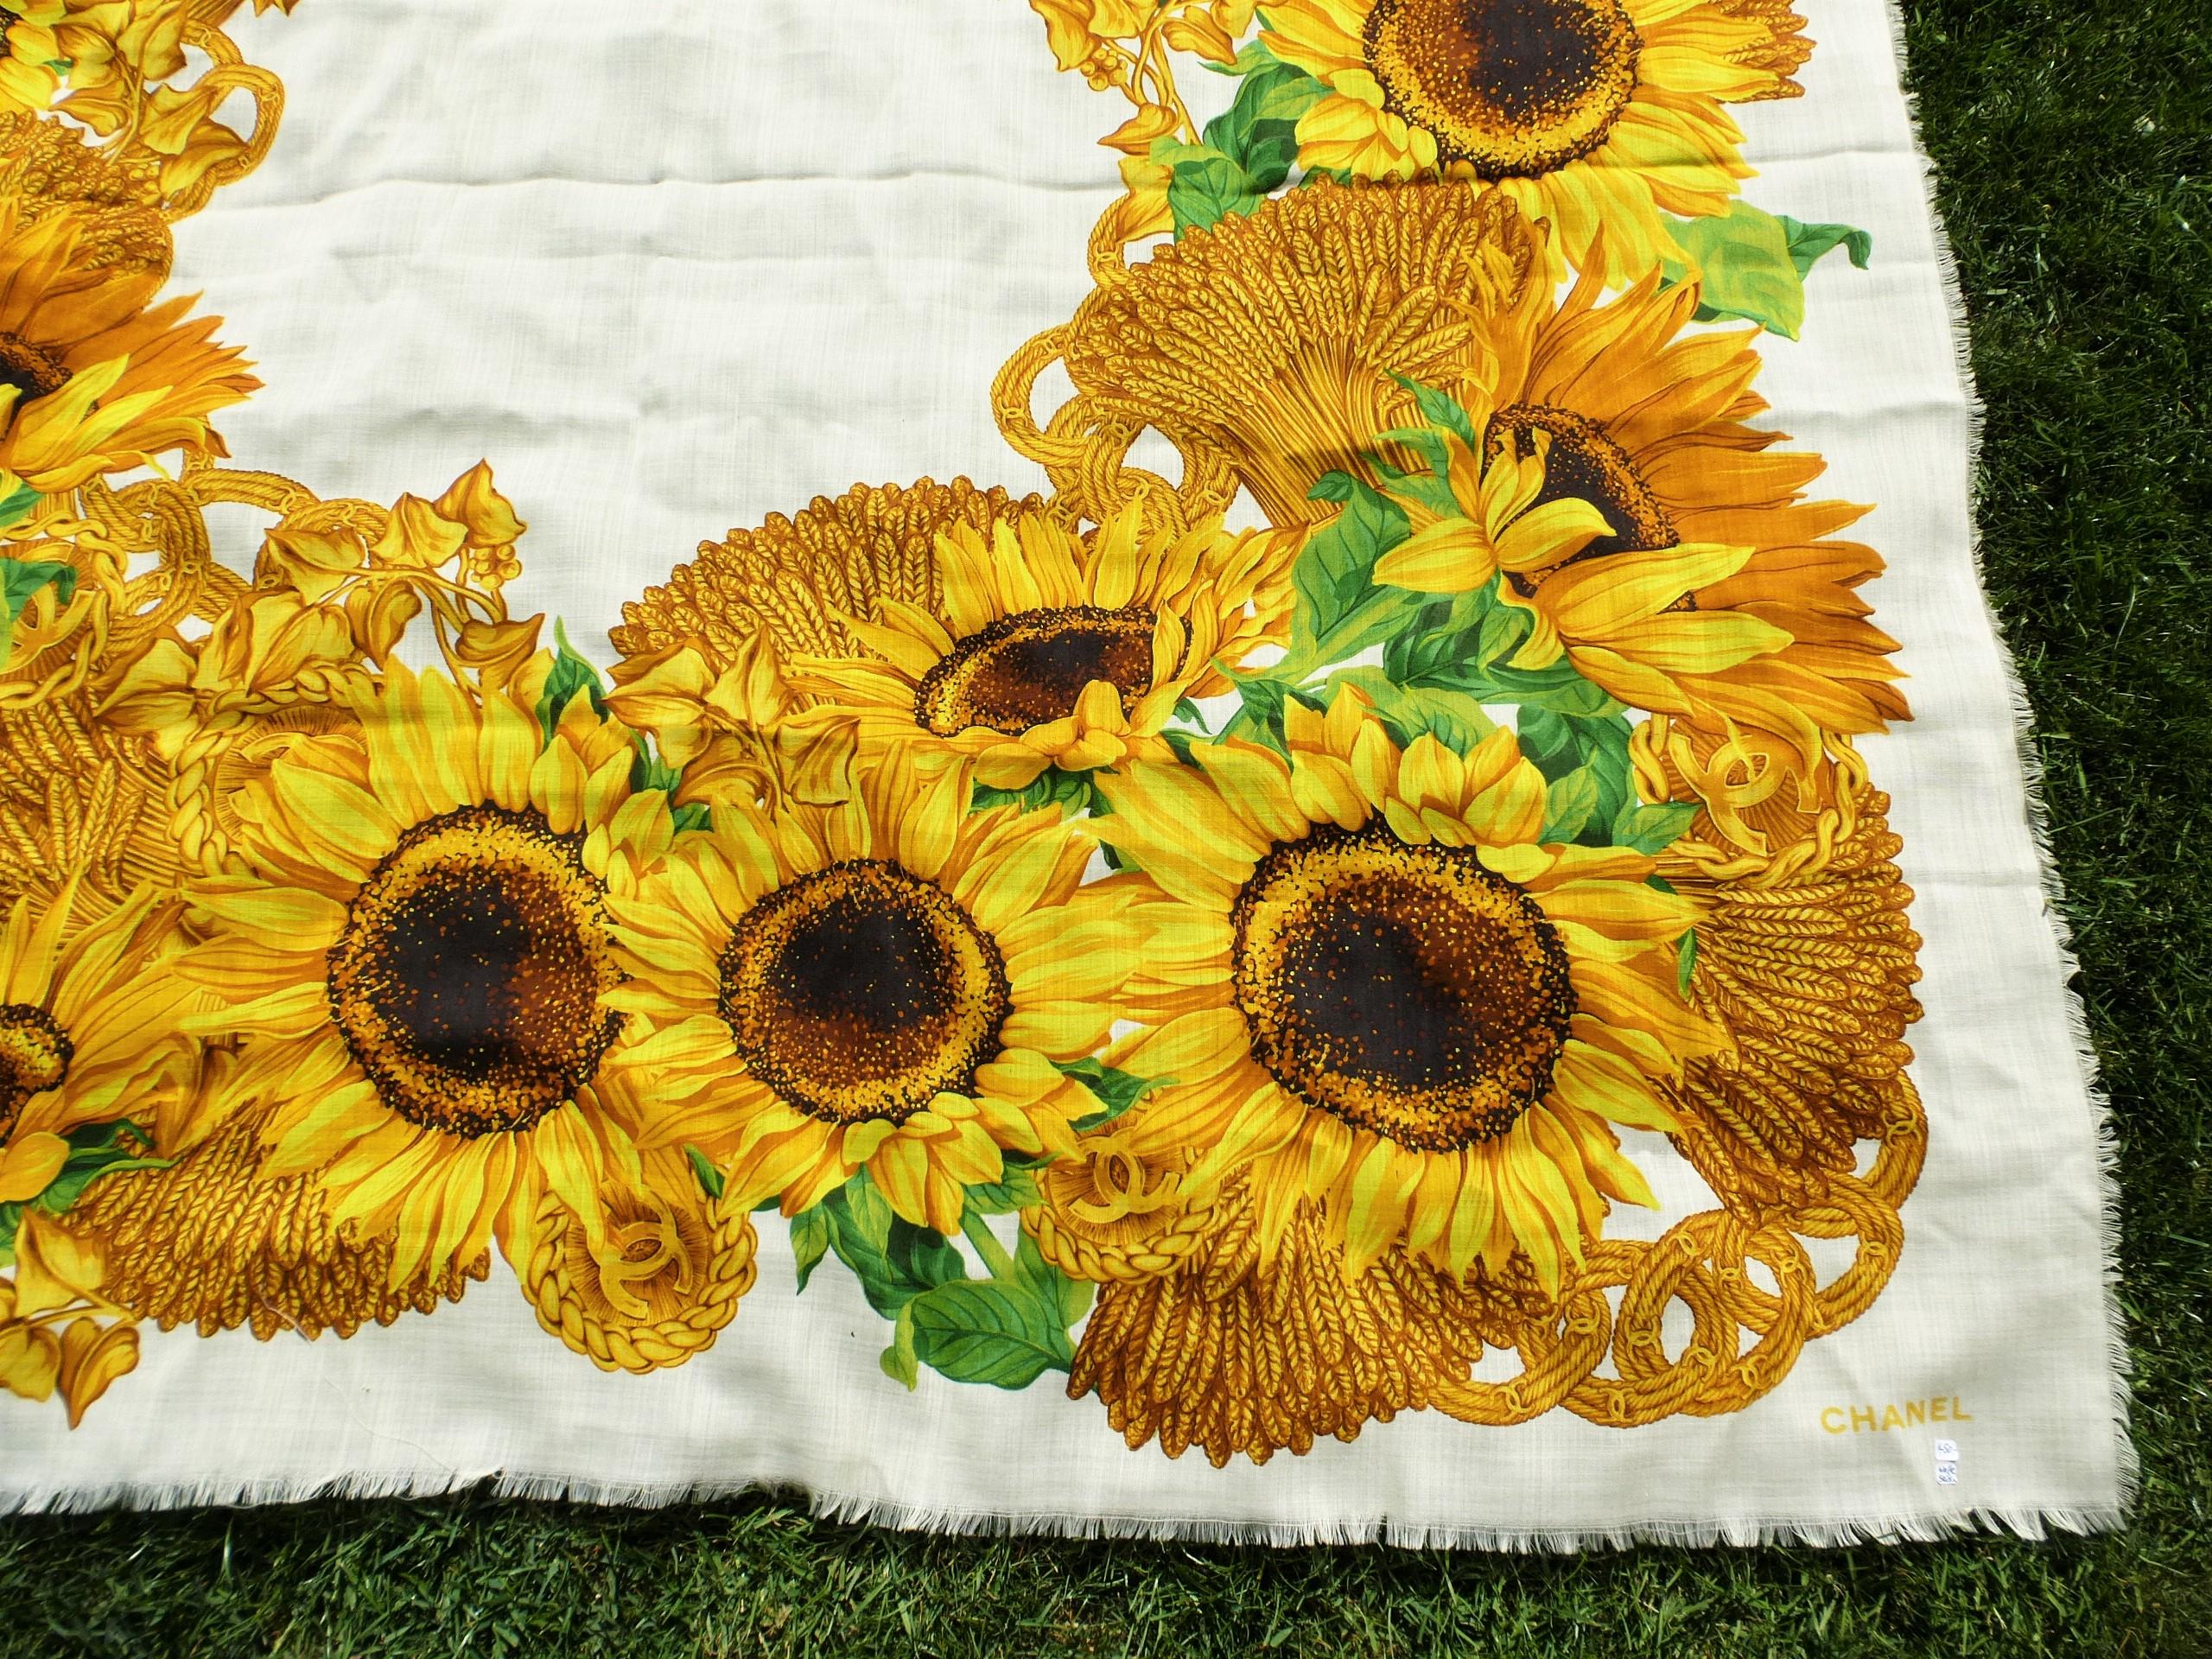 Vintage Chanel scarf silk wool Size 130 x 130 cm, yellow sunflowers and CC  For Sale 8